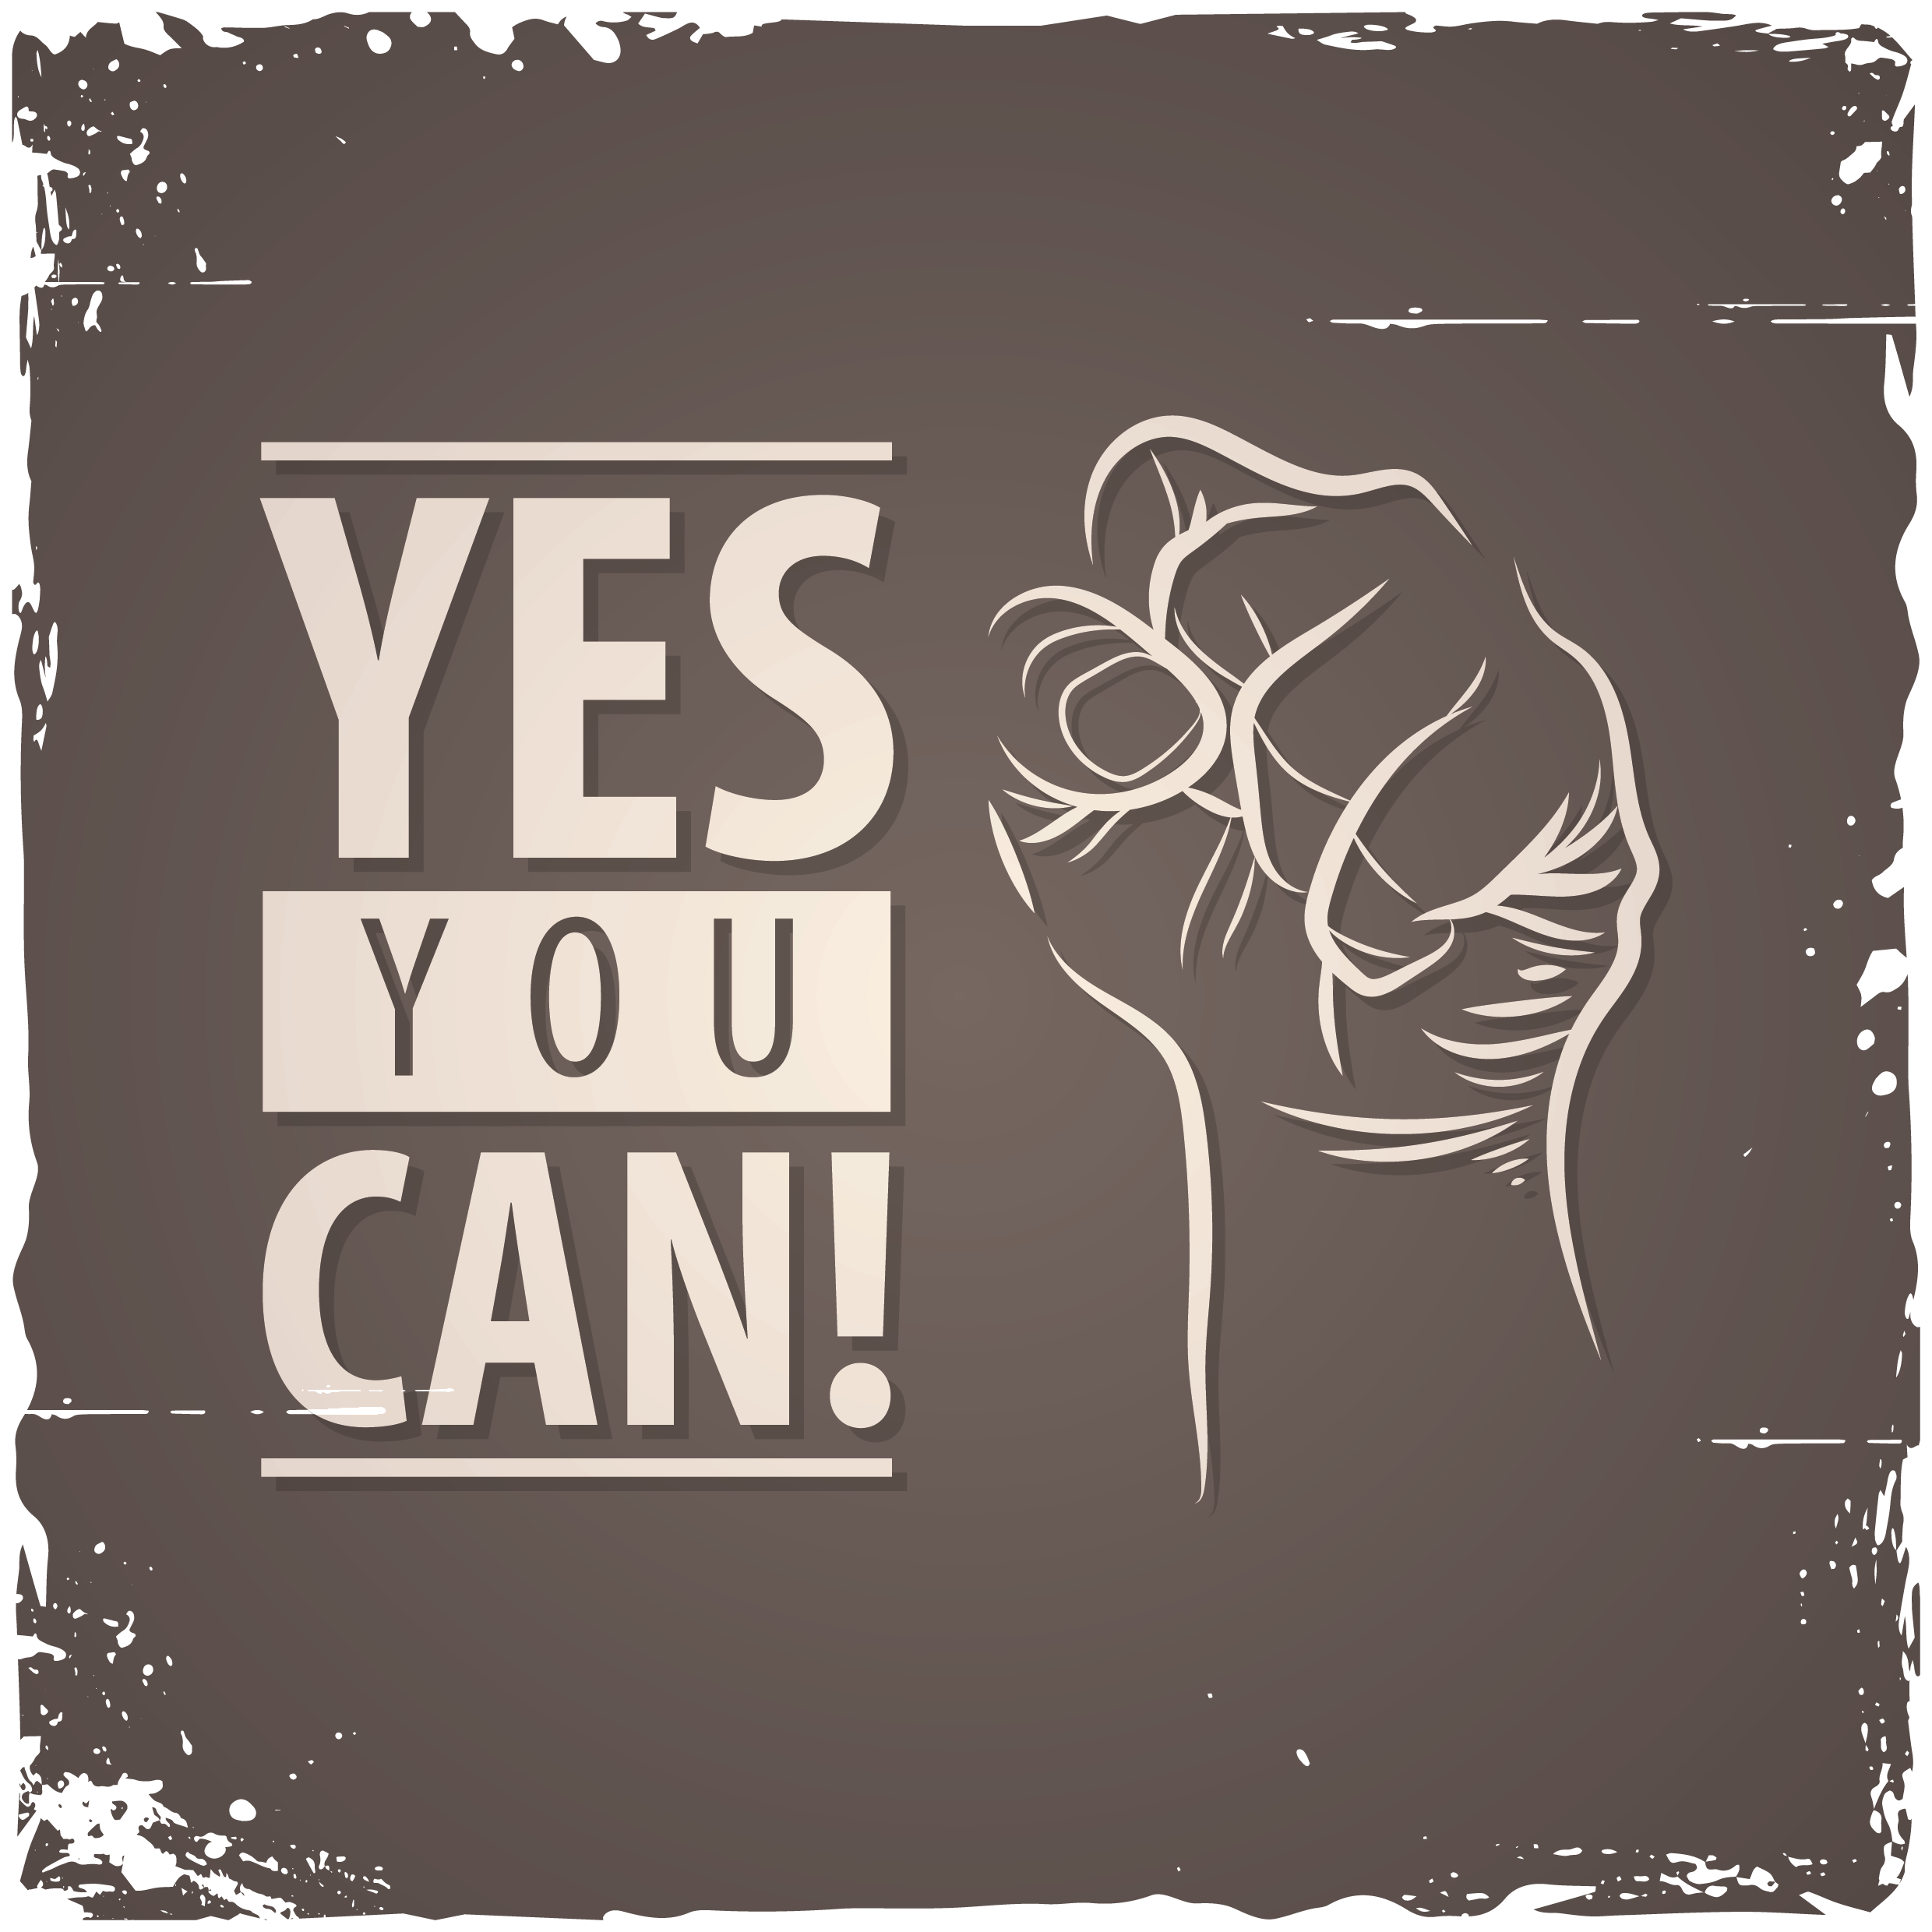 Yes lets do this. Yes you can. Yes you can картинка. Обои на телефон Yes you can. Заставка Yes i can.